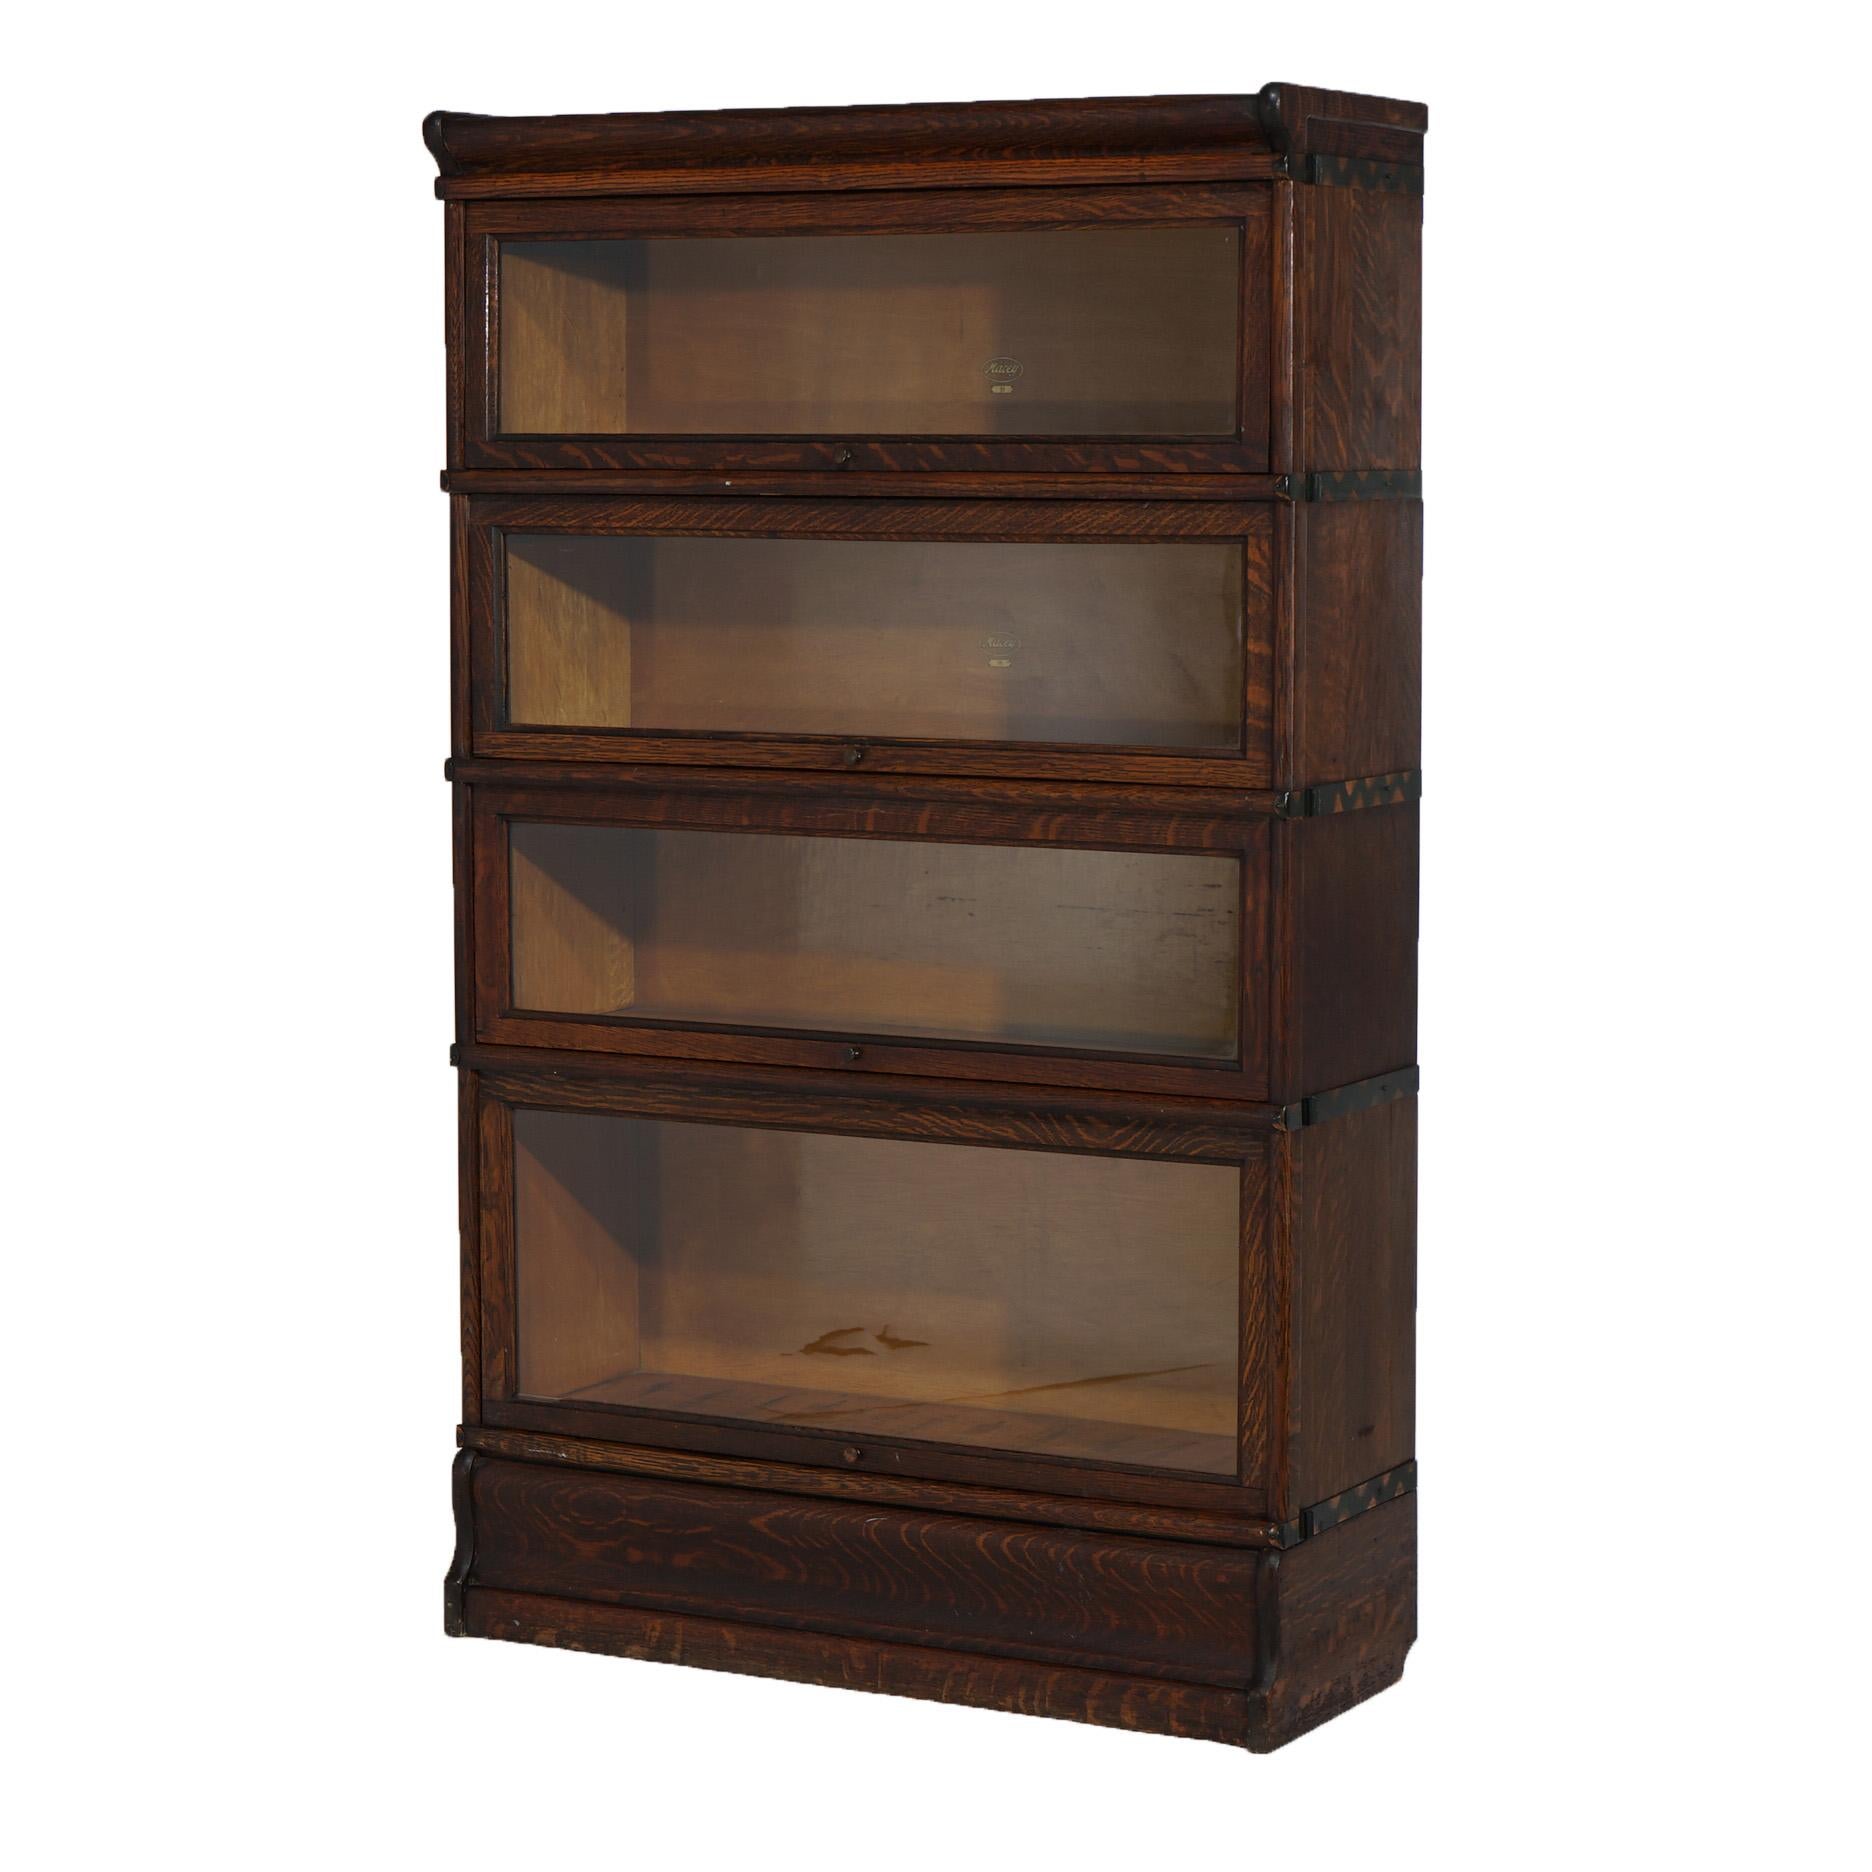 An antique Arts and Crafts barrister bookcase by Globe Wernicke offers quarter sawn oak construction with four stacks, each having pullout glass doors, and raised on and ogee base, c1910

Measures - 56.25